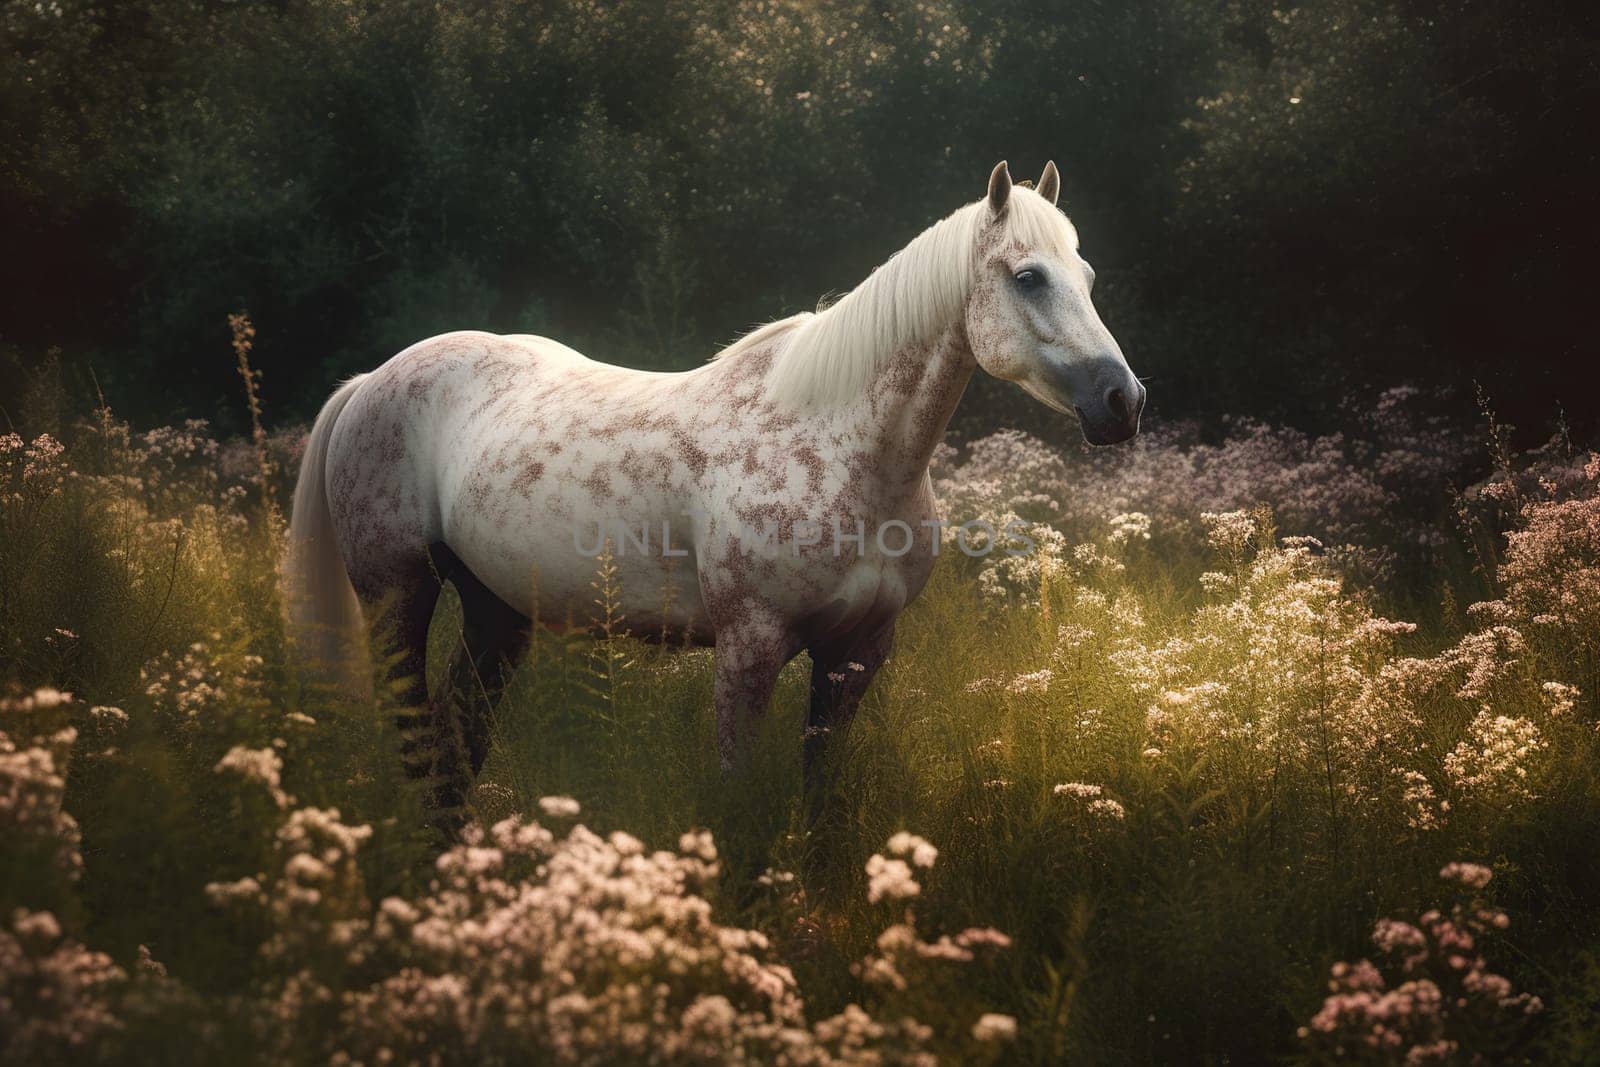 Magnificent Horse Grazing On A Flower Meadow by tan4ikk1